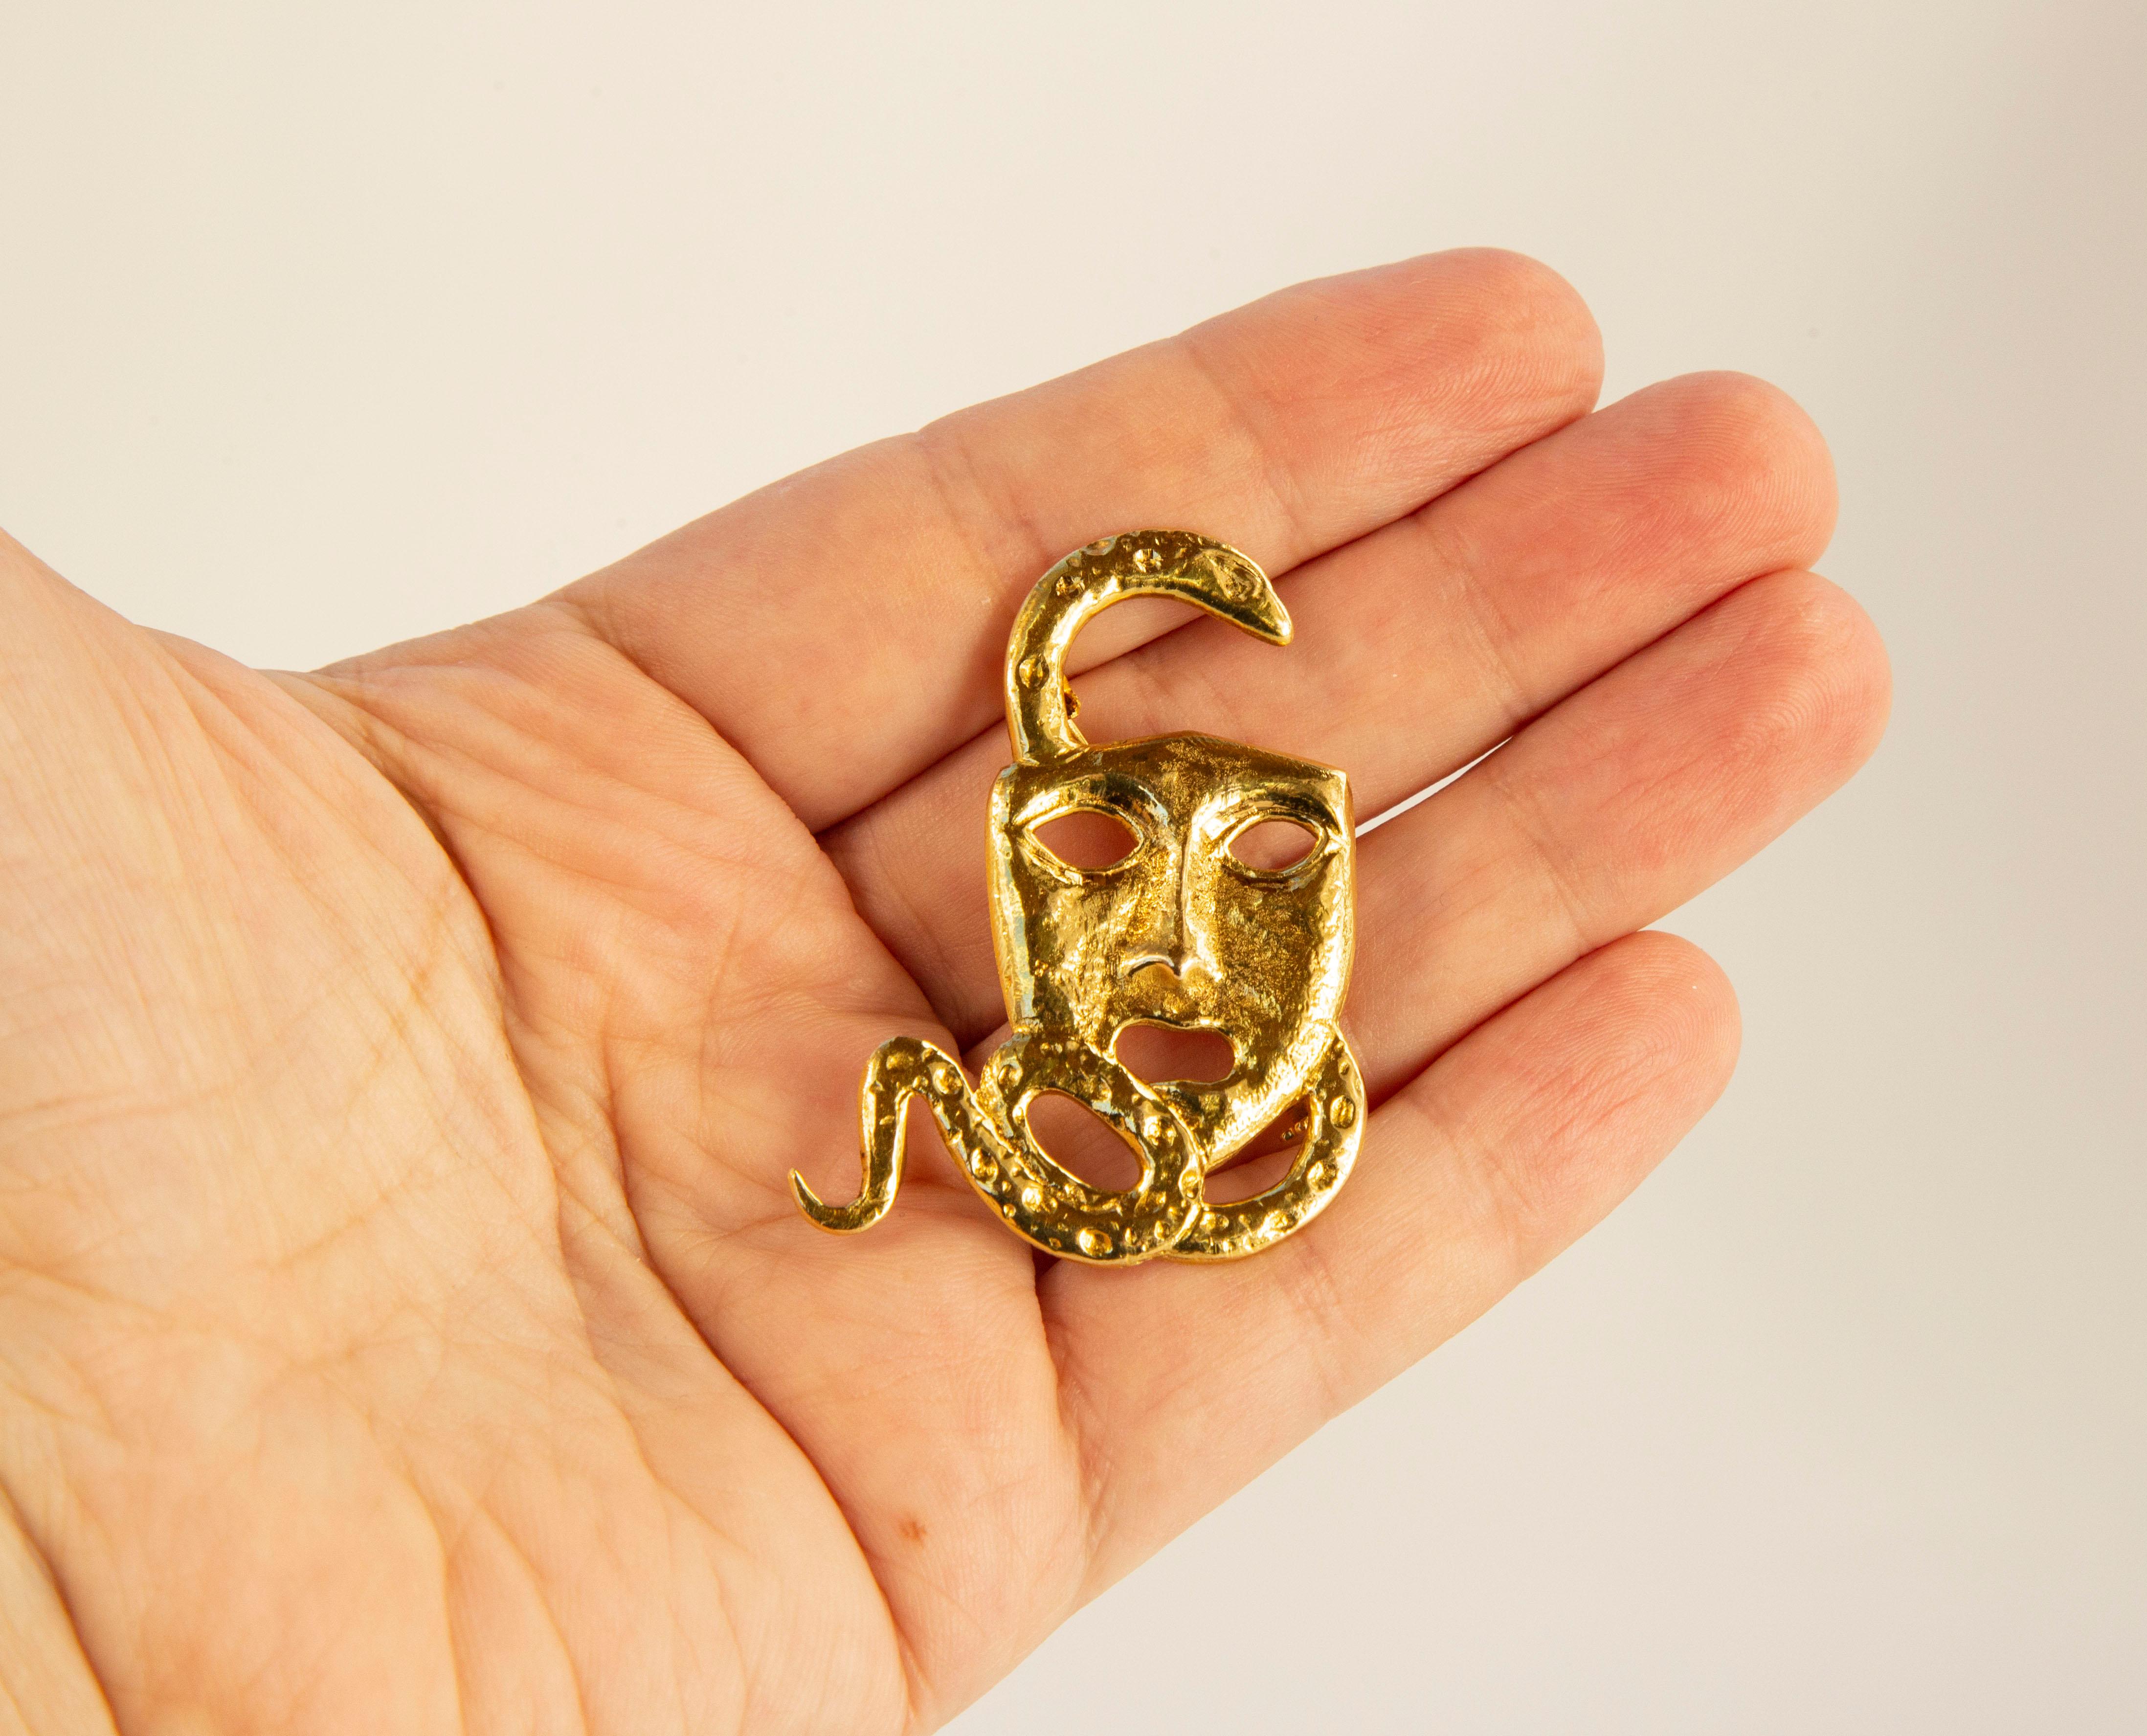 18 Karat Yellow Gold Brooch Designed as an Actor Drama Mask with a Snake For Sale 3